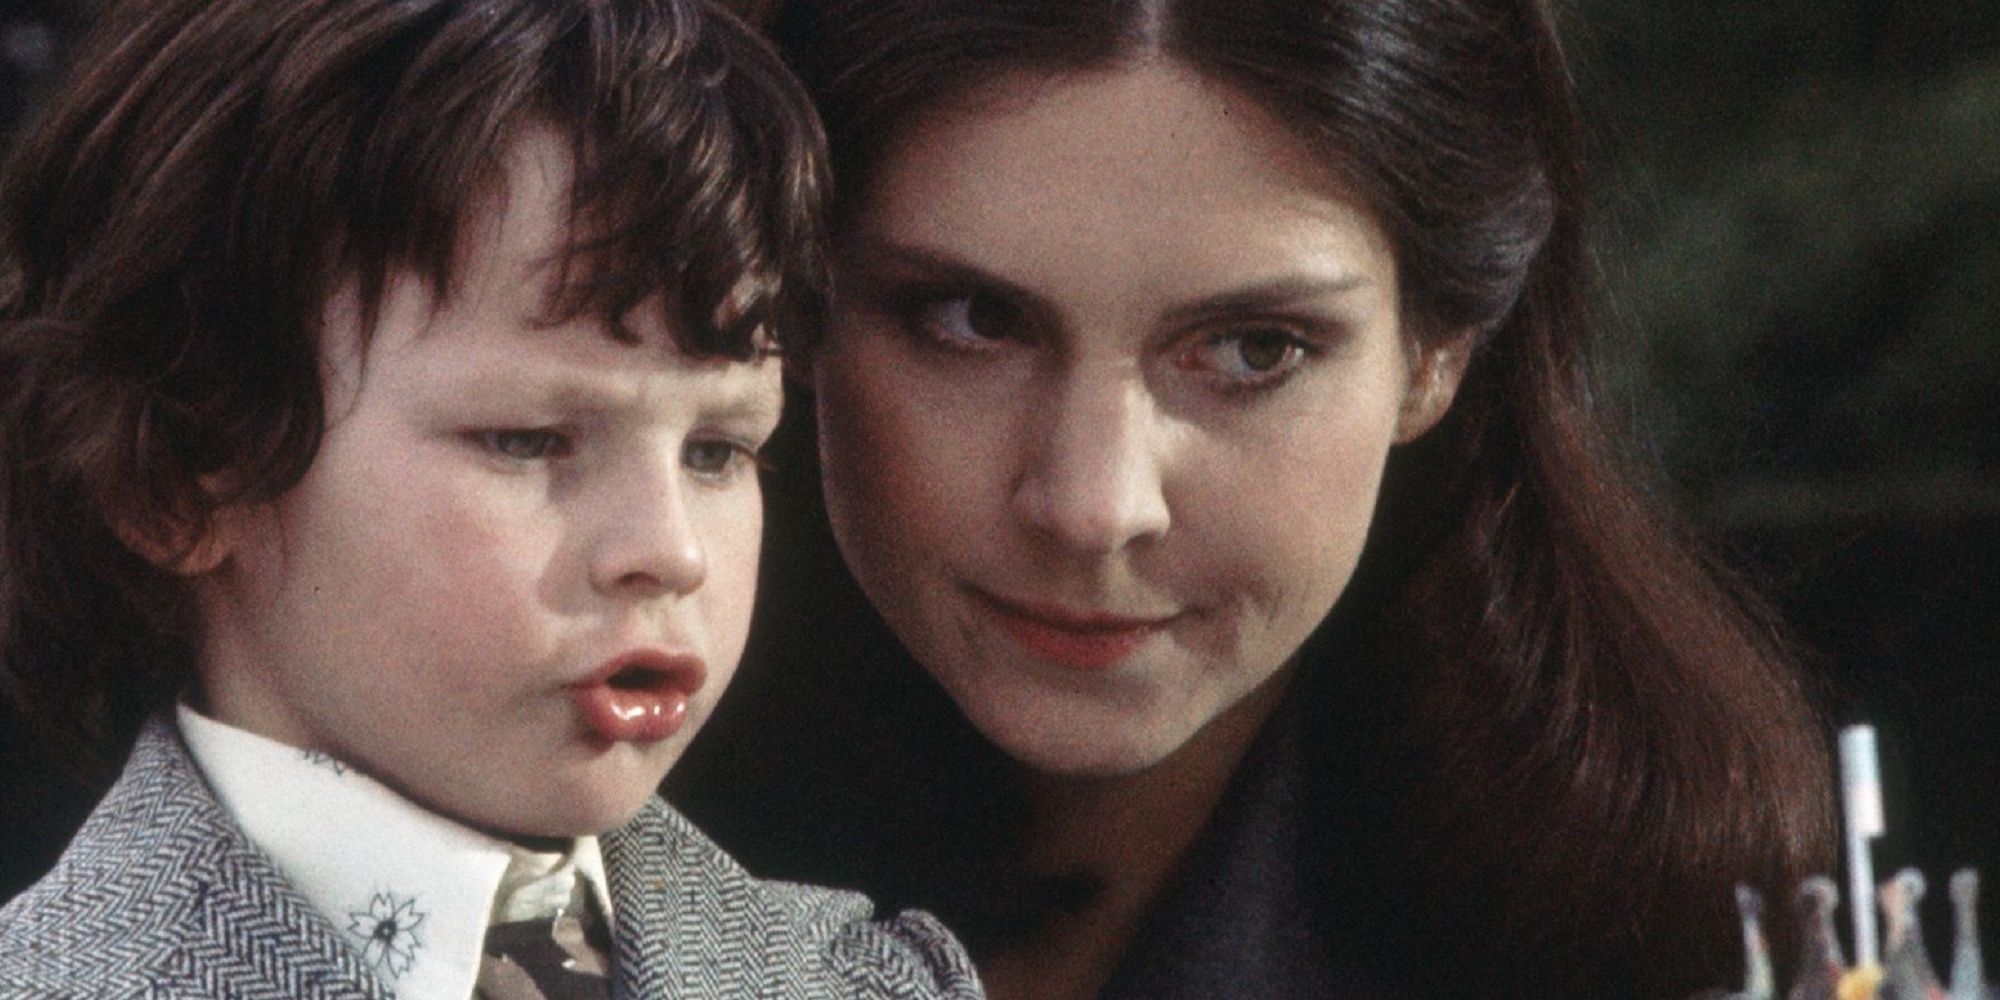 Was The Omen Really a Cursed Production?